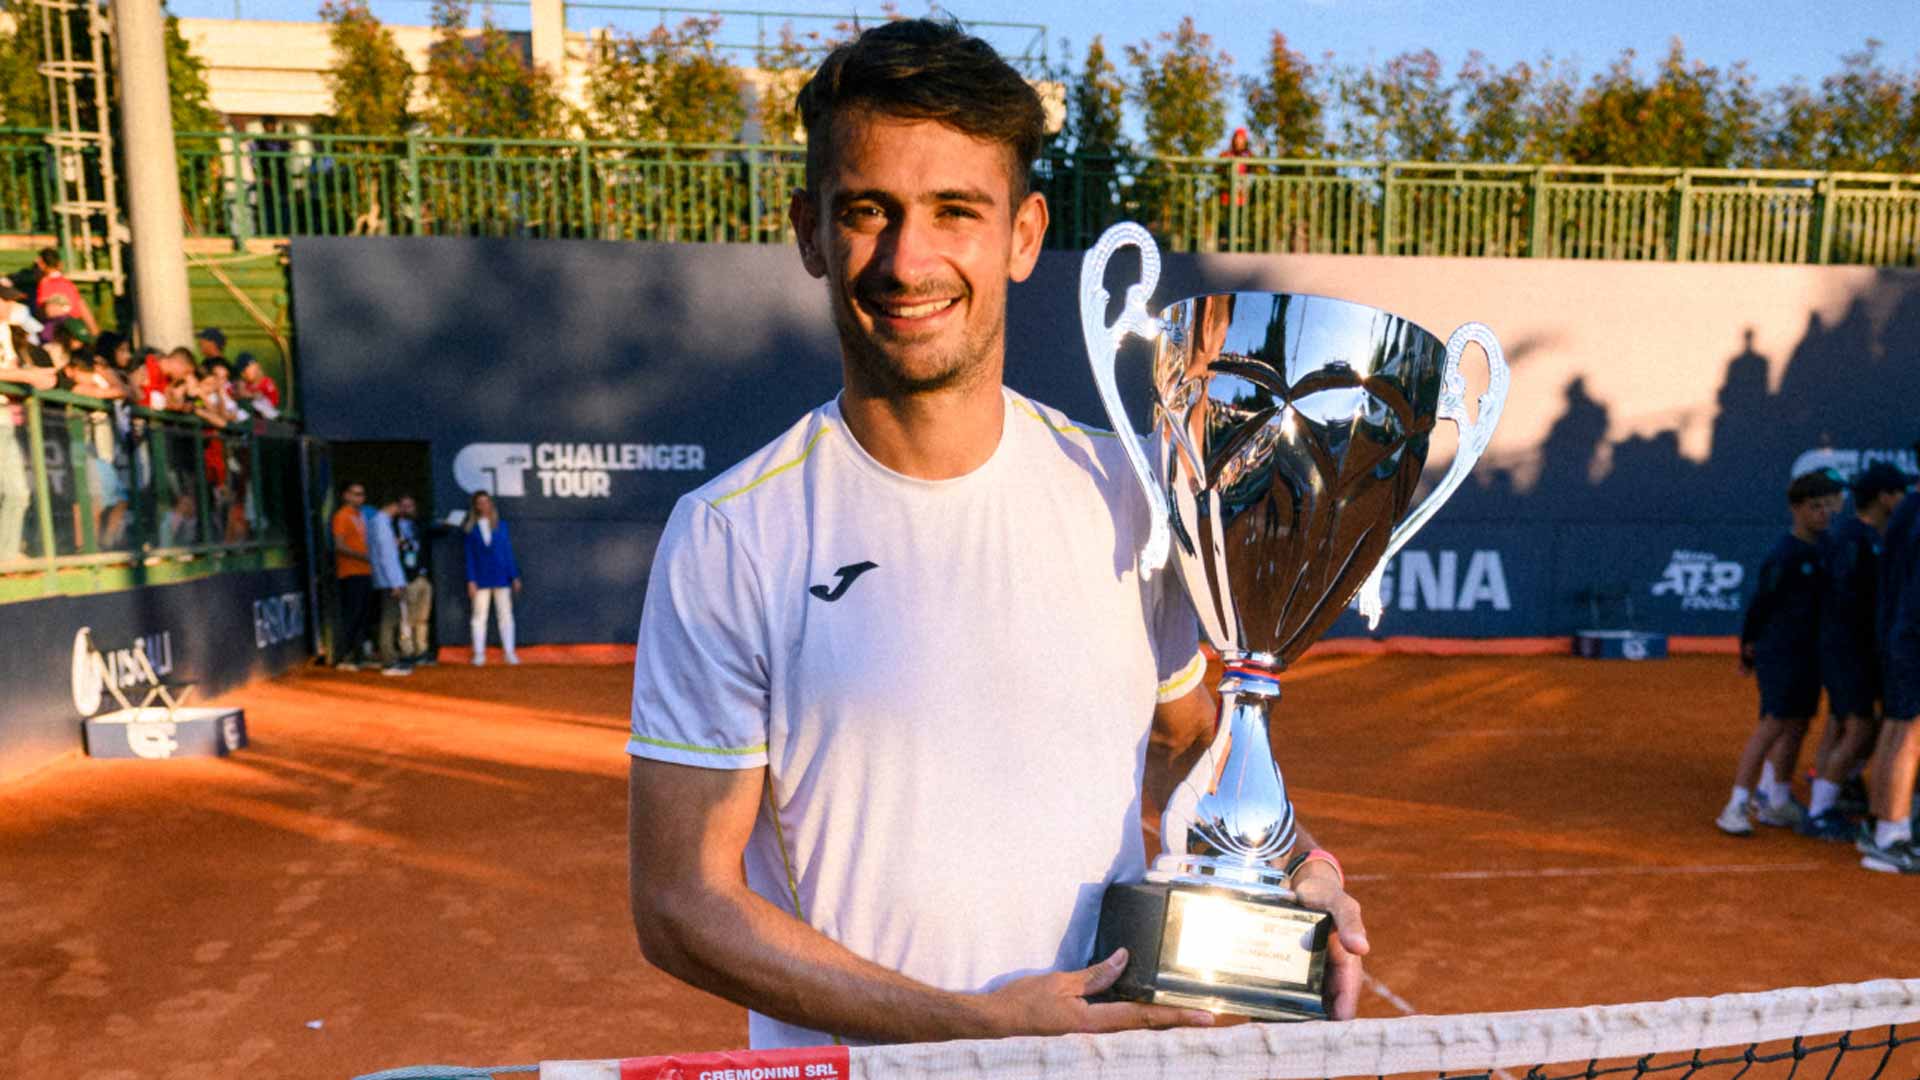 Navone notches biggest career title at Cagliari Challenger